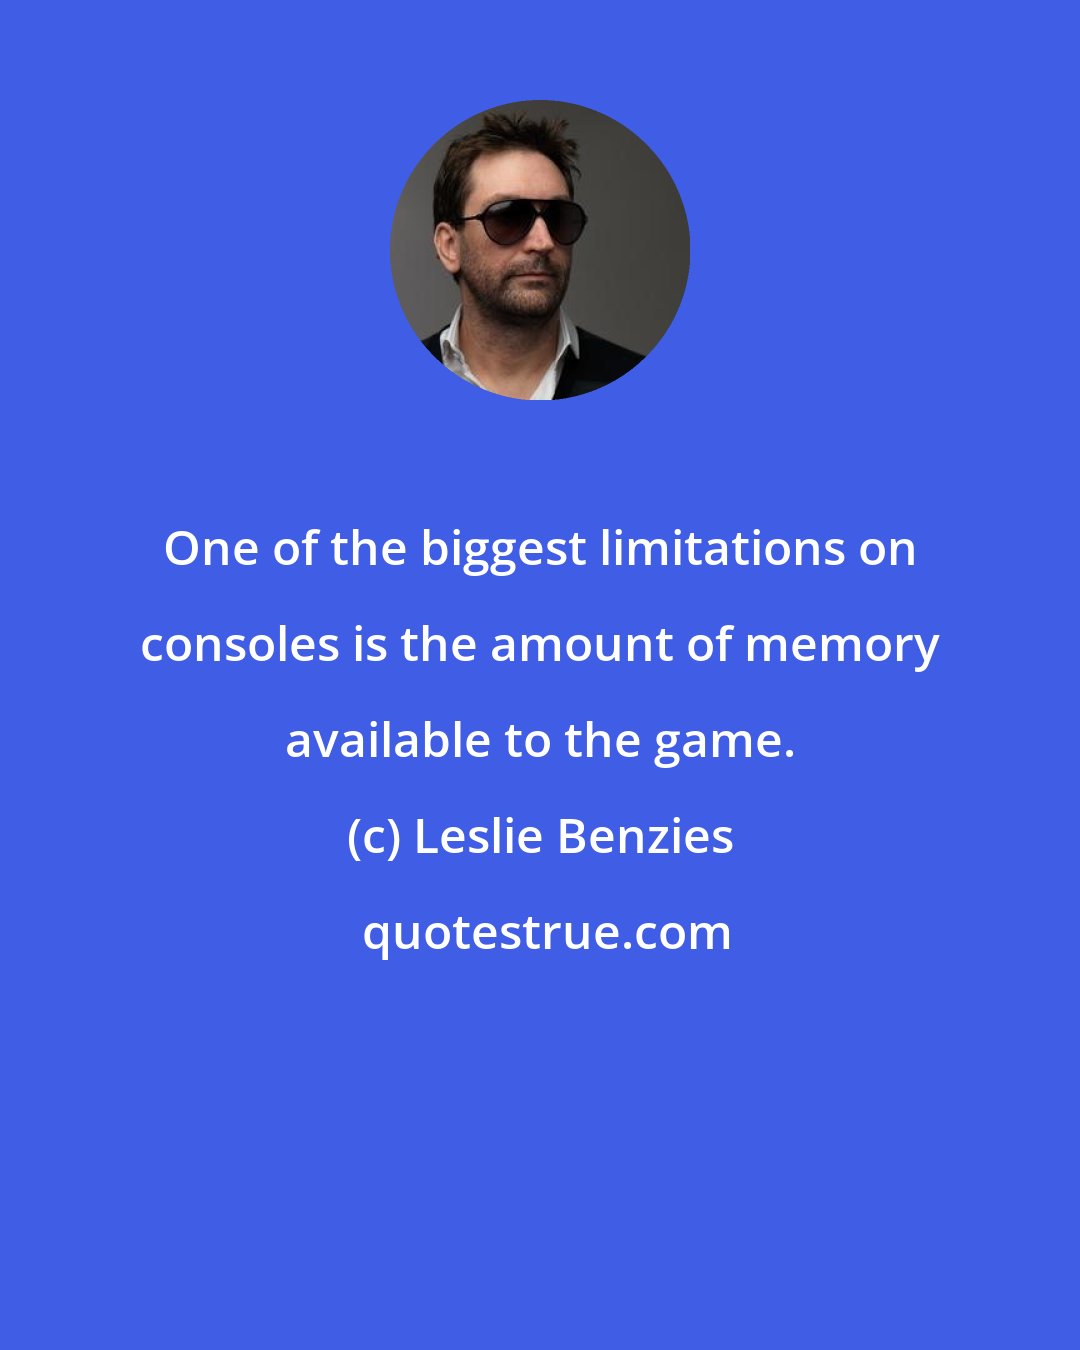 Leslie Benzies: One of the biggest limitations on consoles is the amount of memory available to the game.